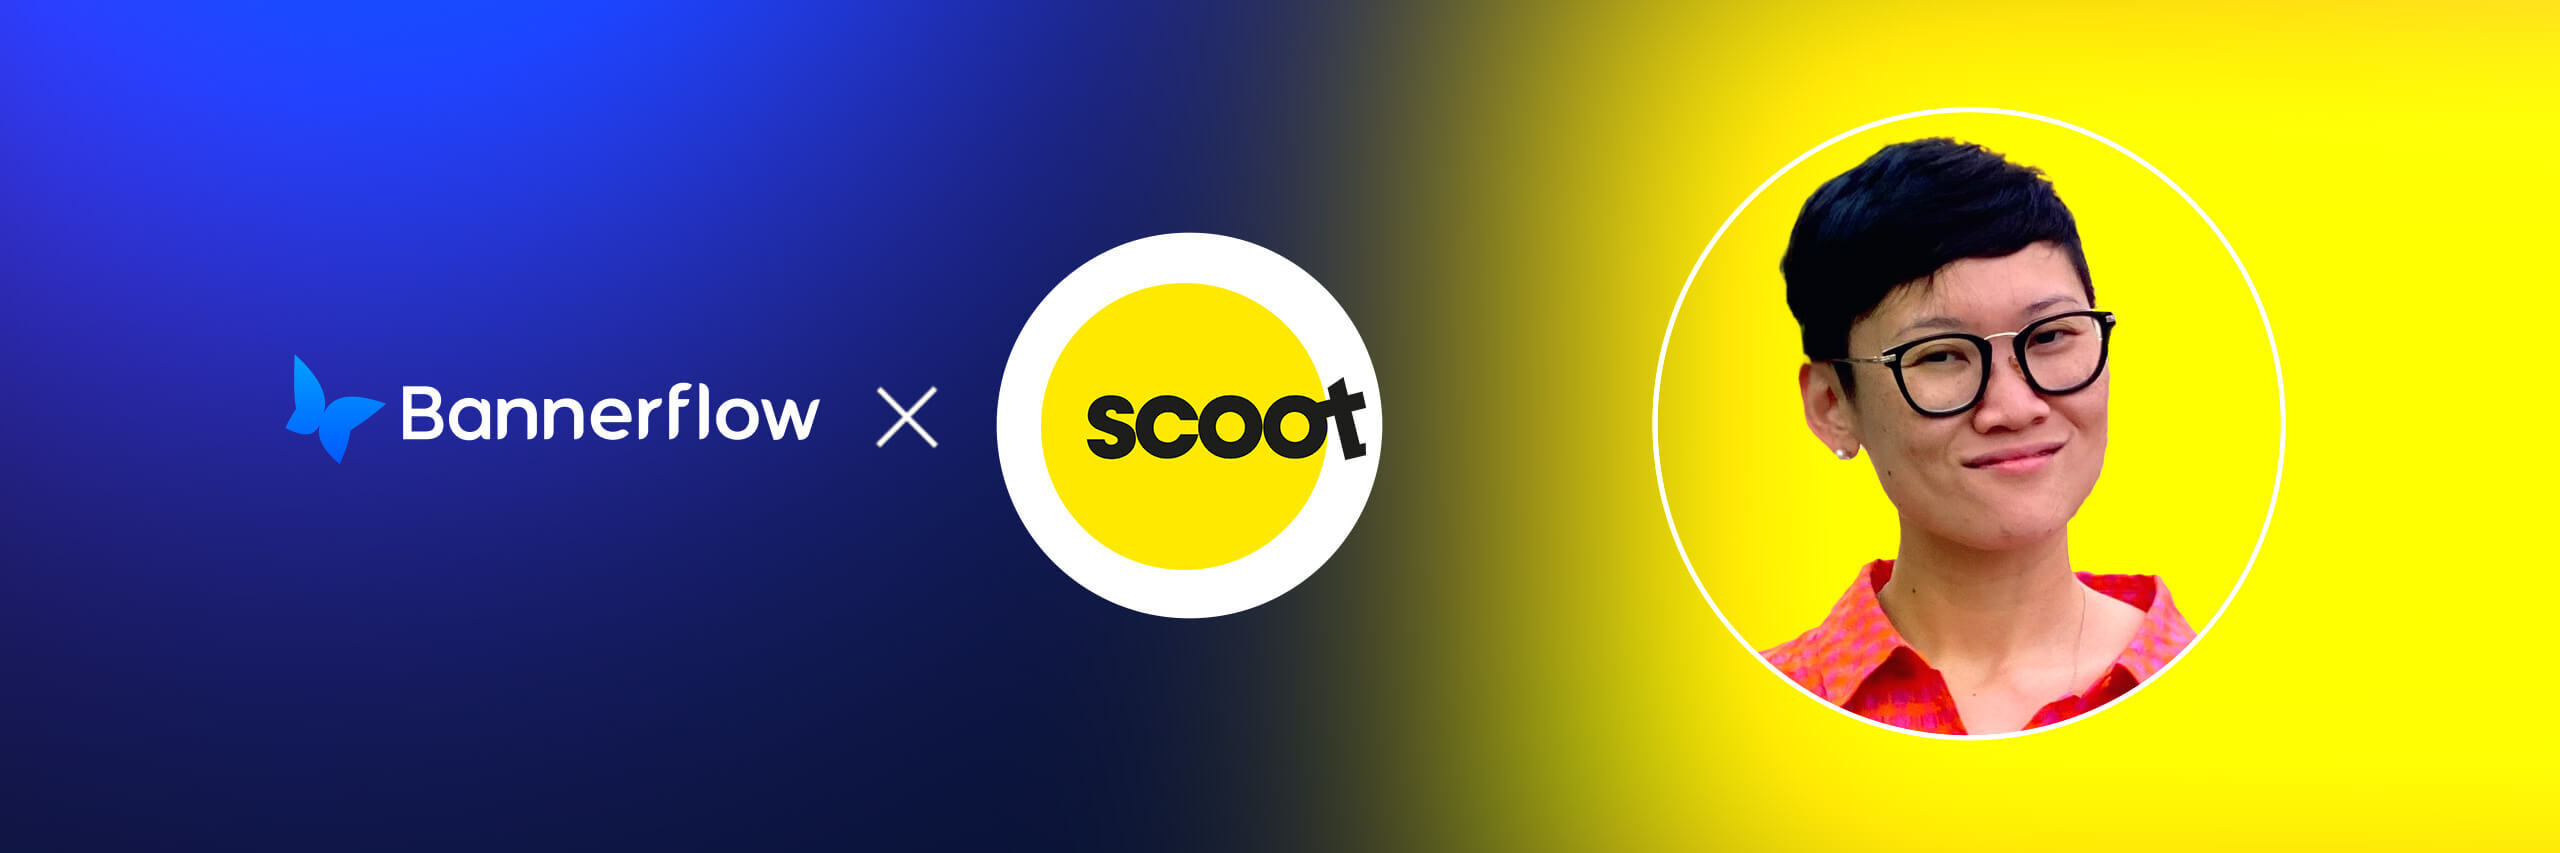 Interview: Scoot Airlines - Scaling Up Advertising with Bannerflow